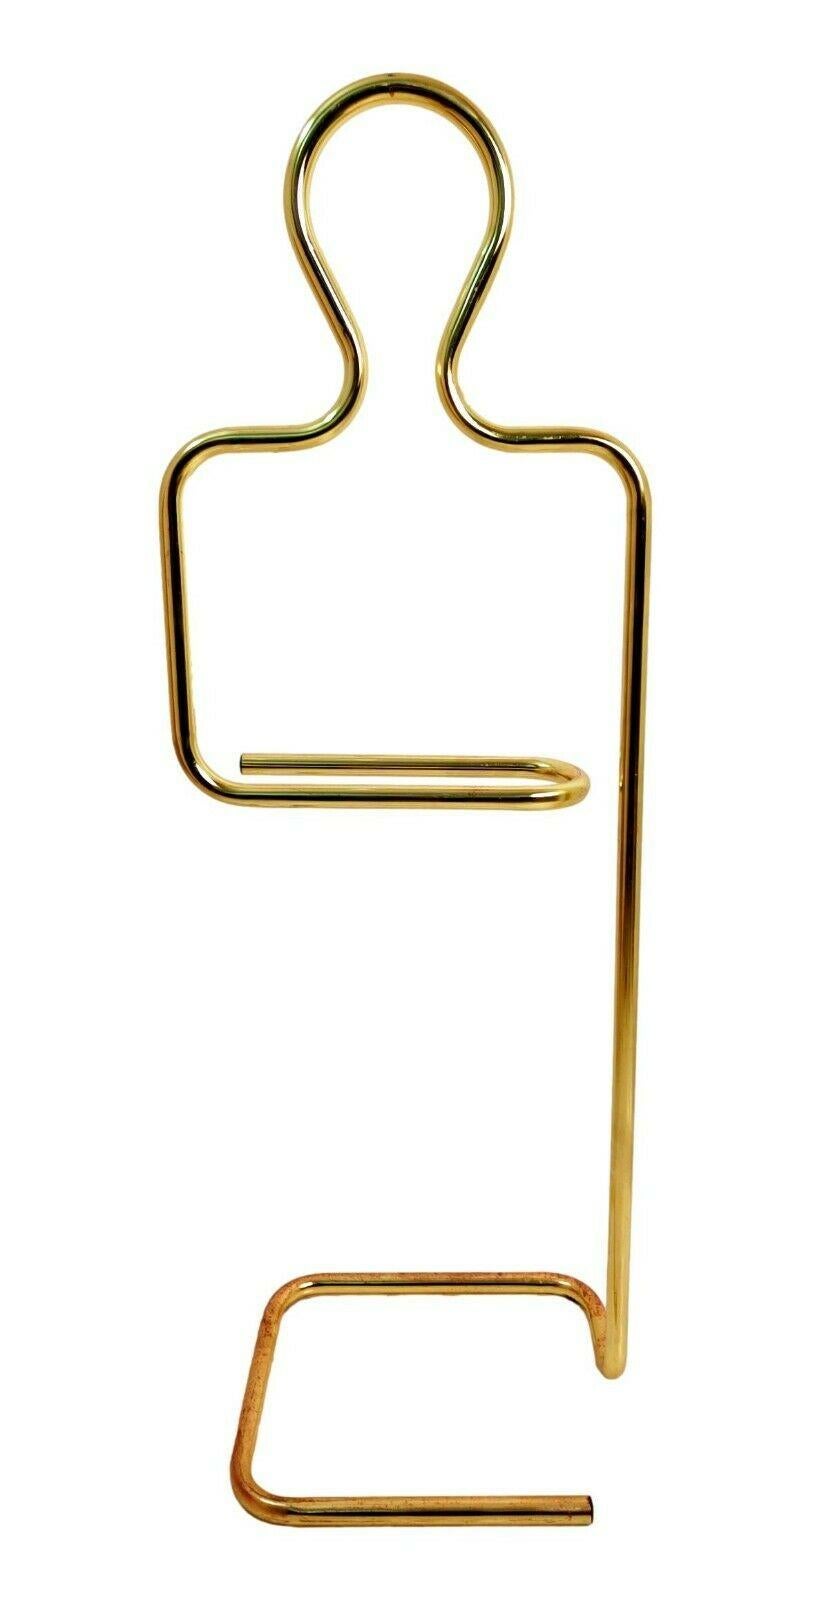 valet stand in original gilded metal from the 70s, design Pierre Cardin

It measures 141 cm in height, 48 cm in width and 38 cm in depth at the base

Very good condition, as shown in photos, signs of age and use on the base.